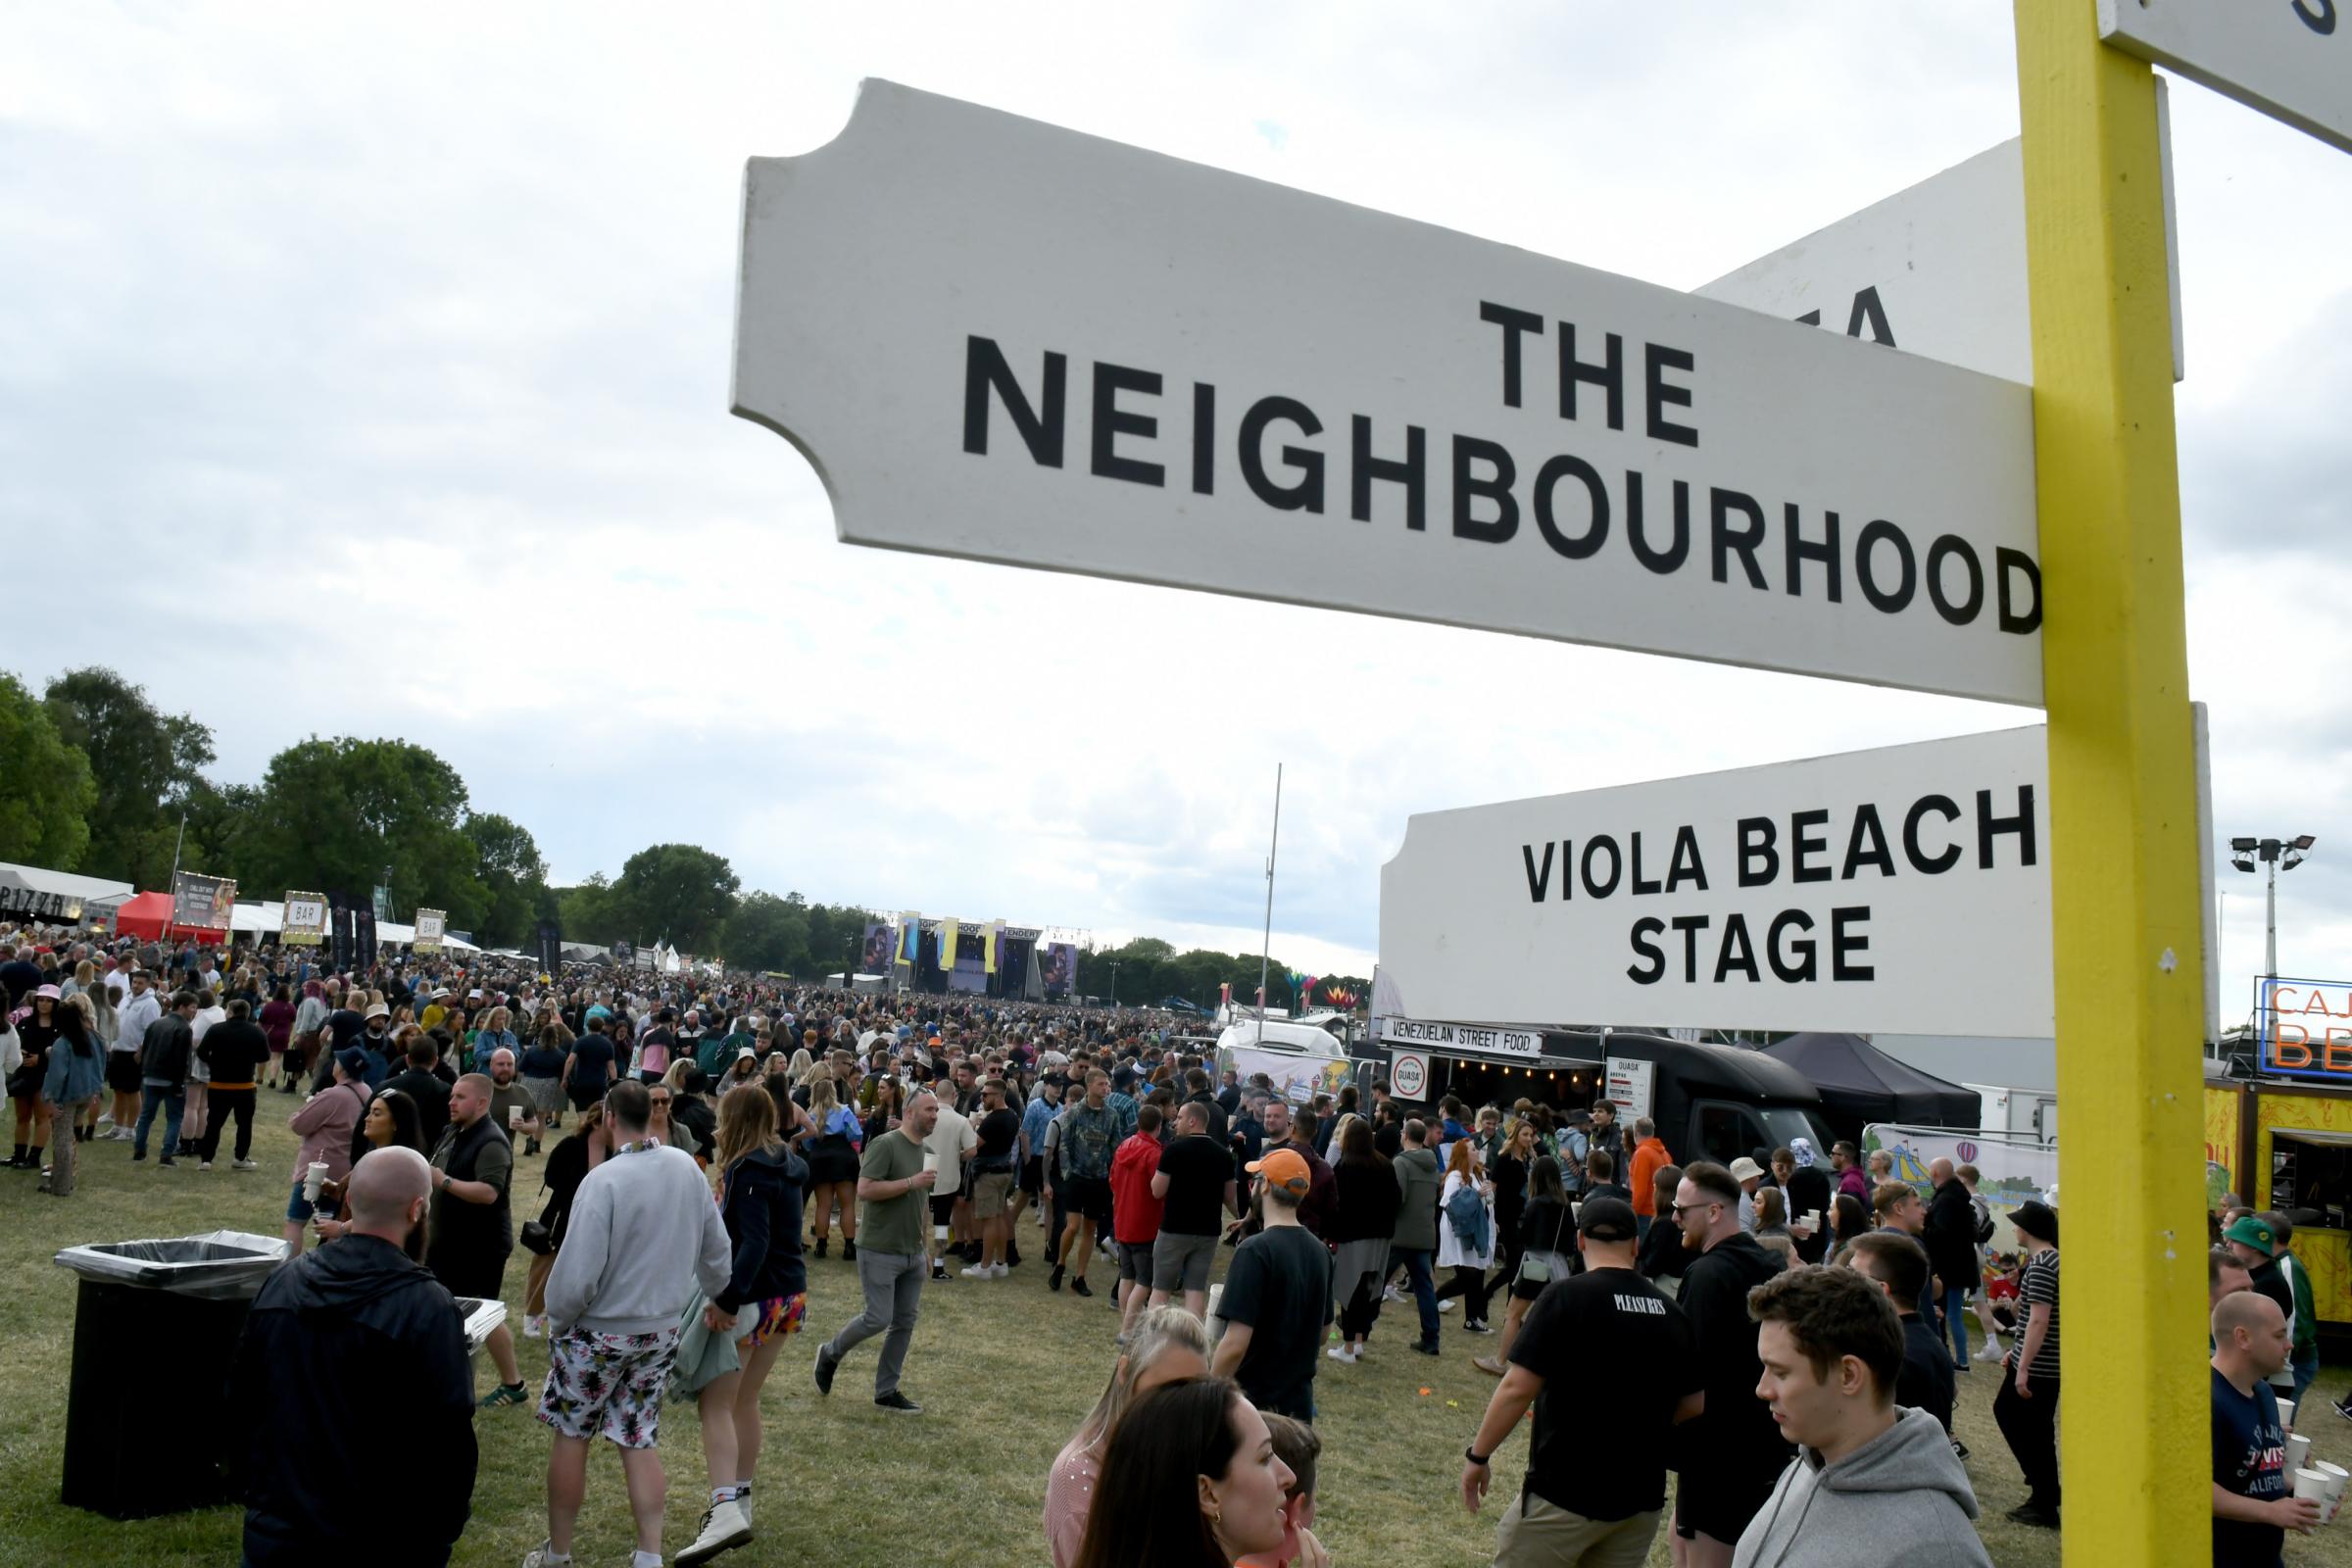 Here's what day one looked like at Neighbourhood Weekender 2023